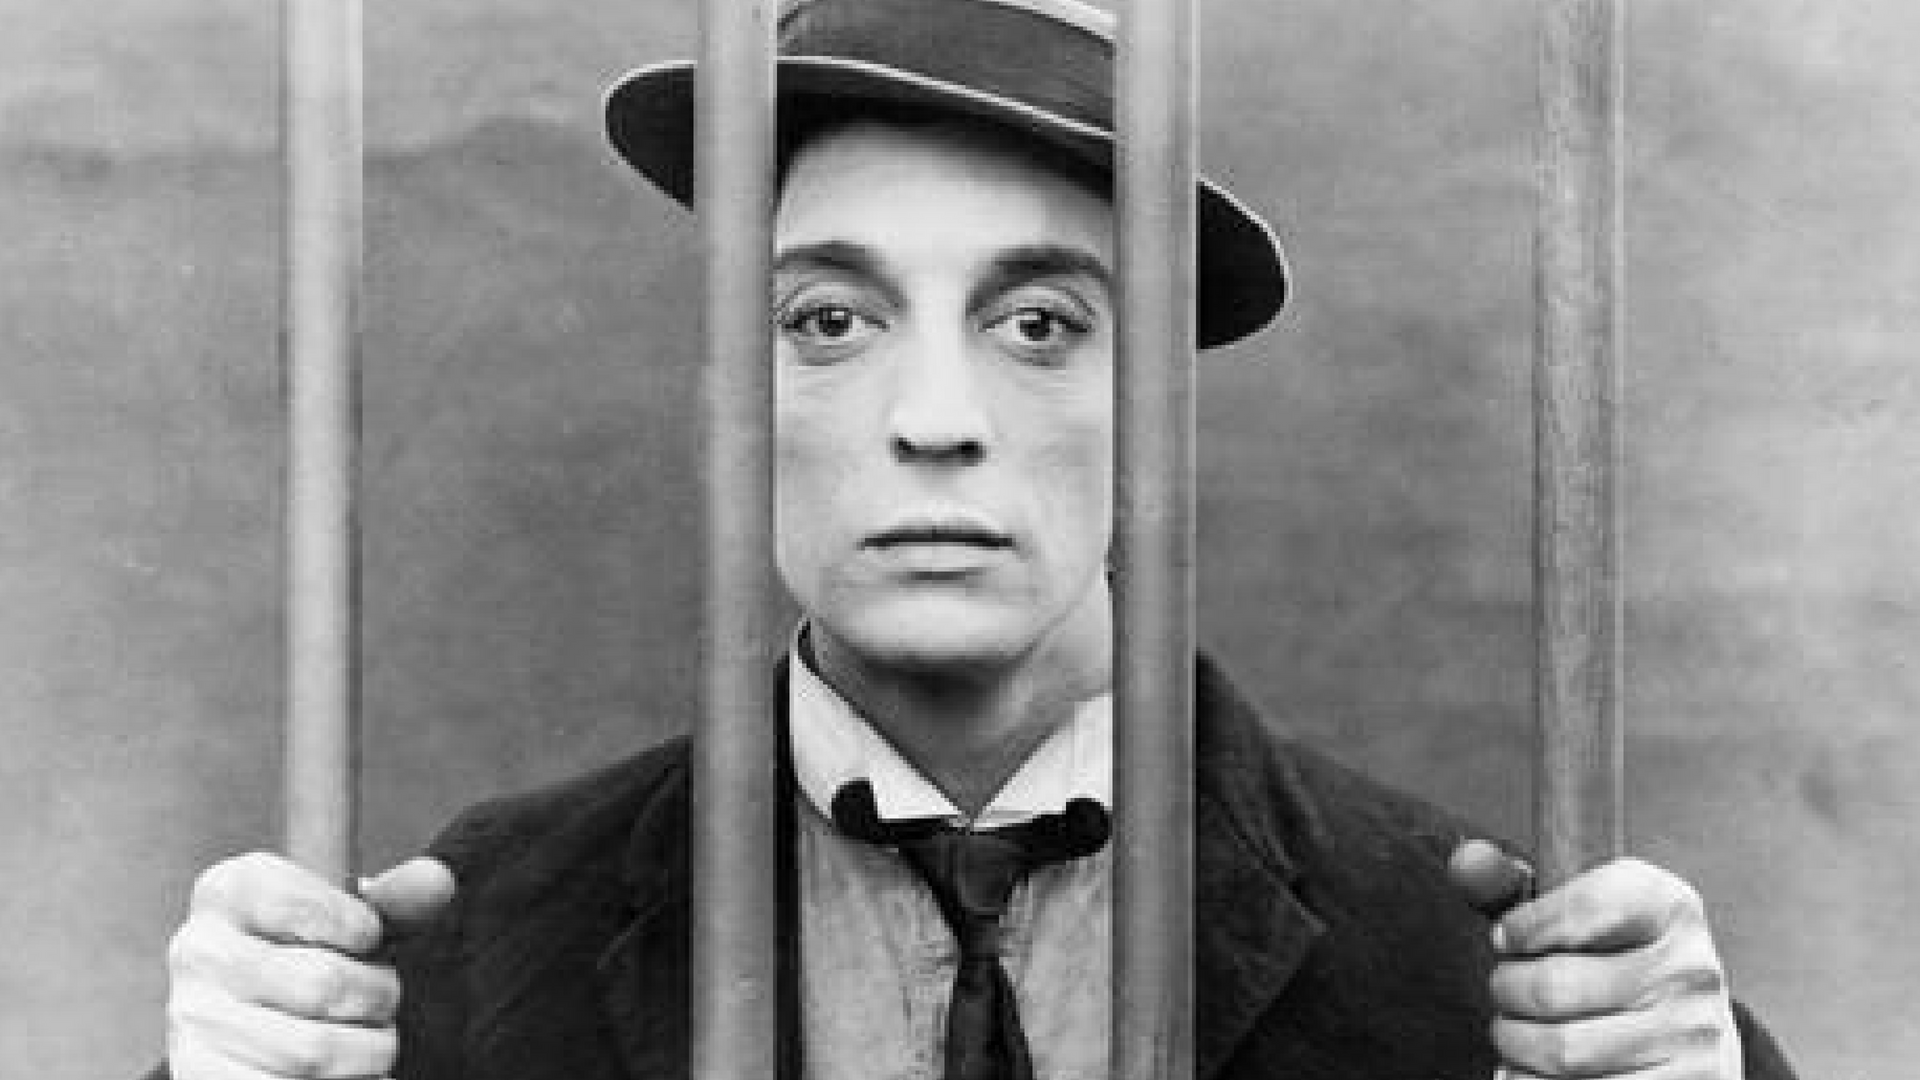 New Film Score by Jon Kull to Buster Keaton's 1921 Comedy, THE GOAT Chamber Symphony